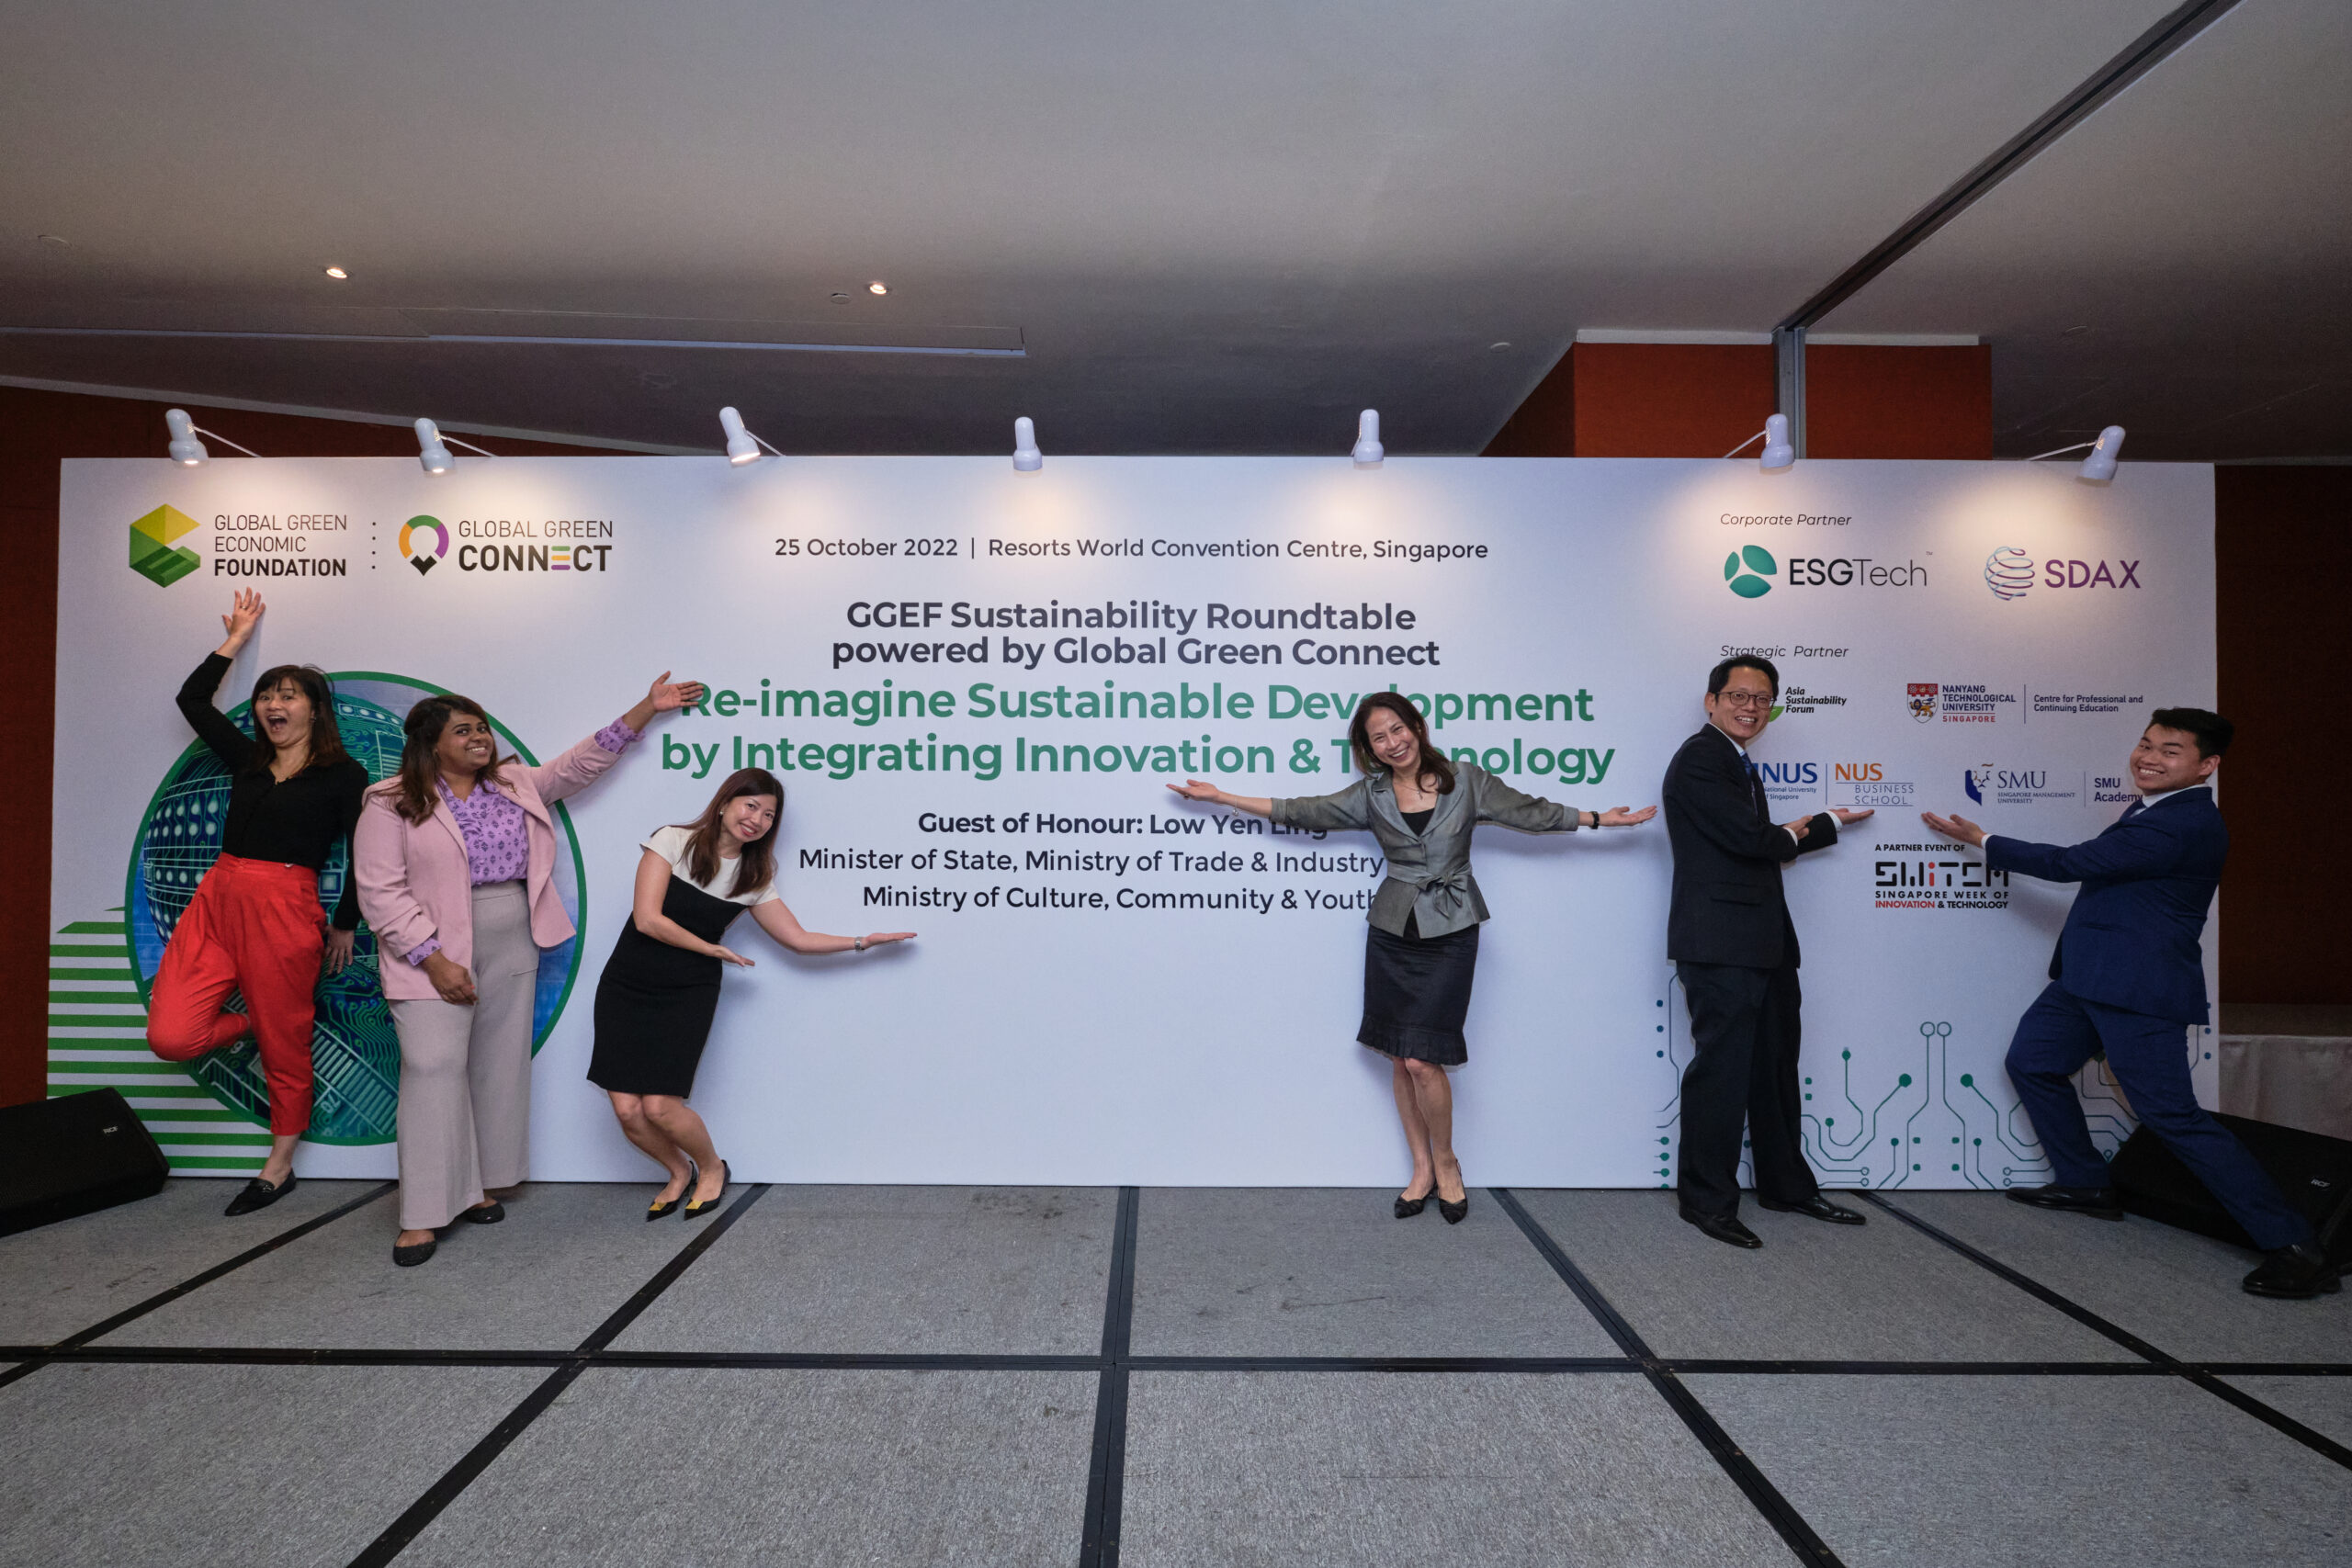 Daren (second from right) posing for goofy photos with his Global Green Connect colleagues after an event